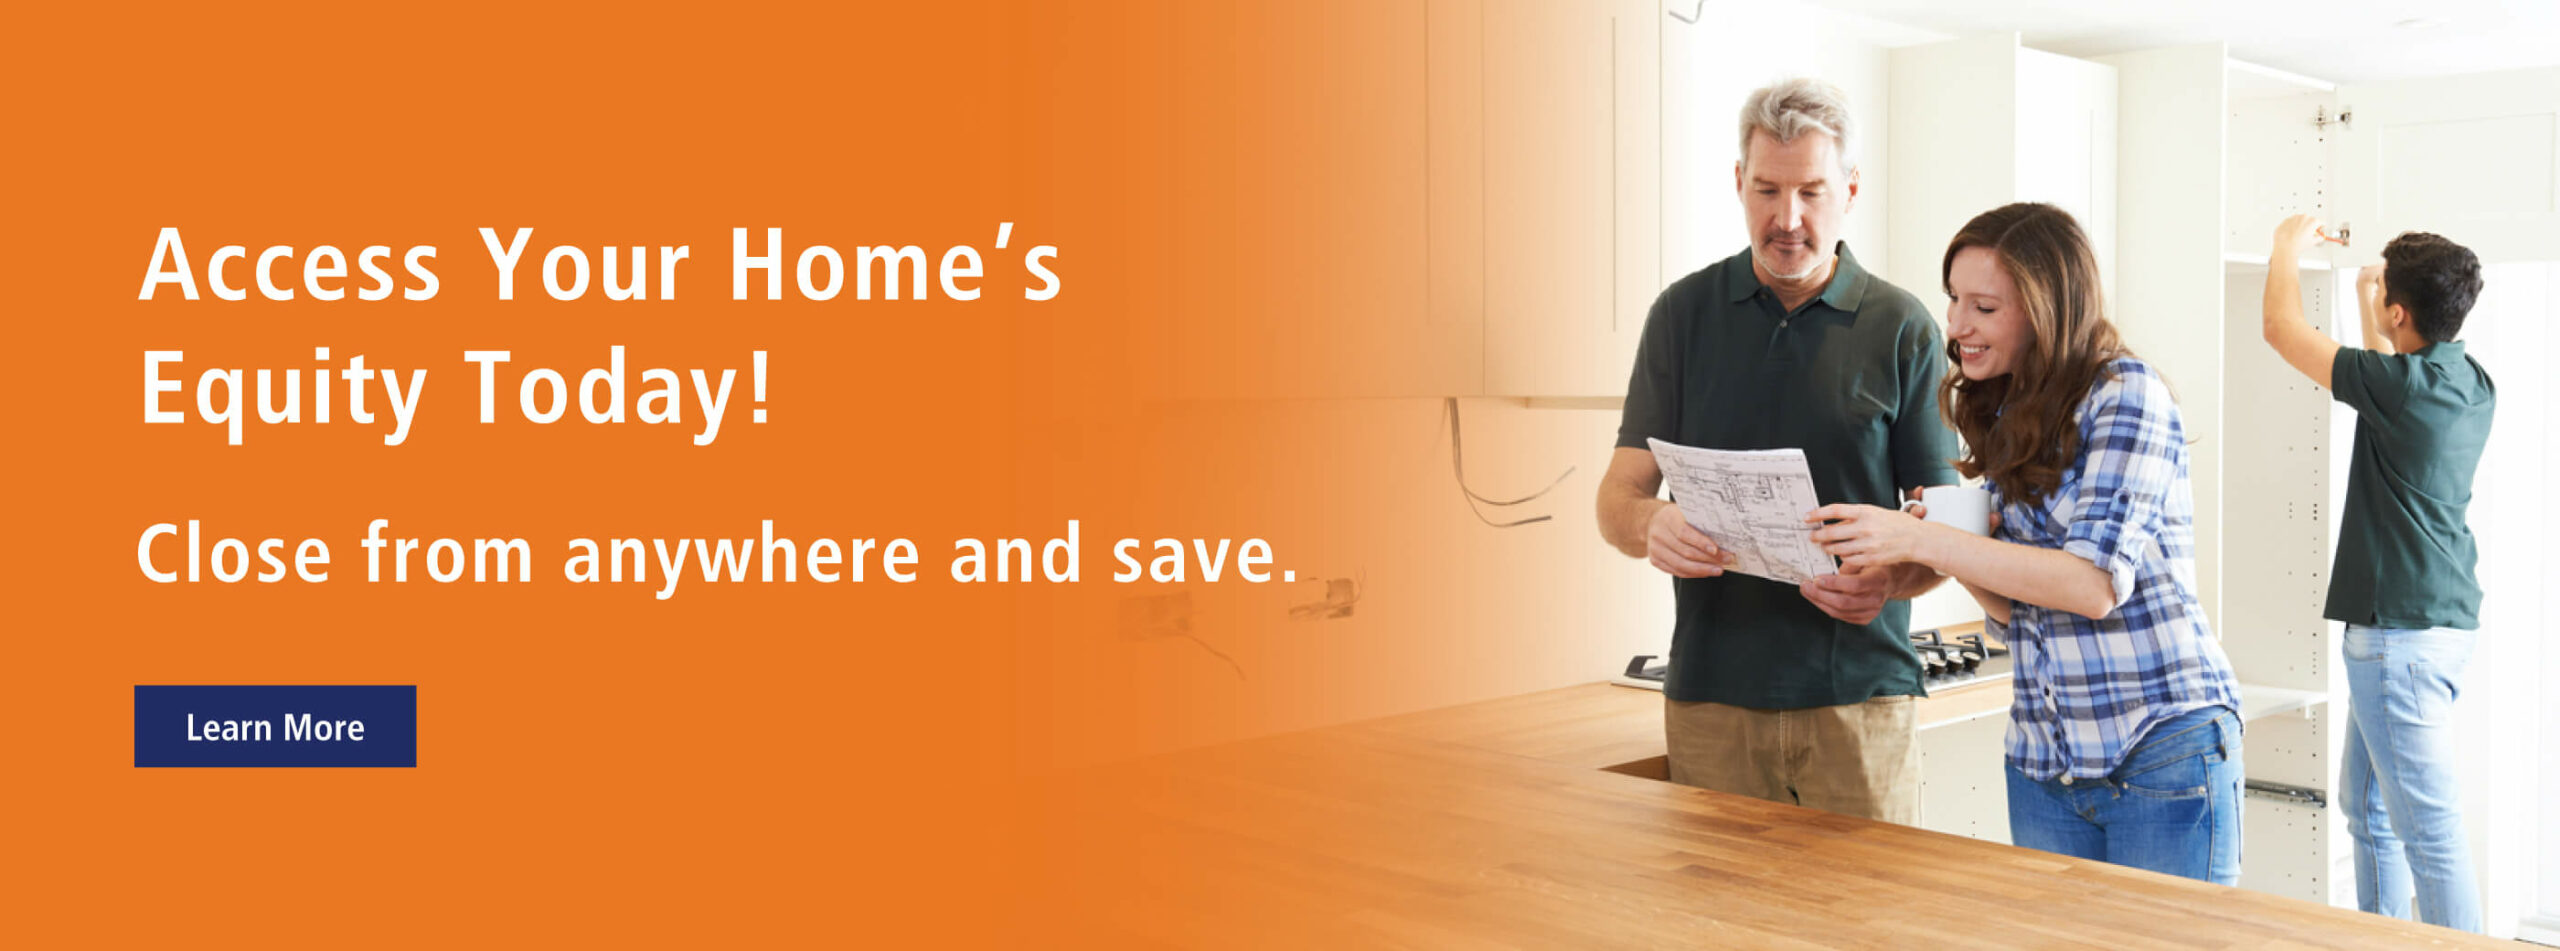 Access your Home's Equity Today. Close from anywhere and save.